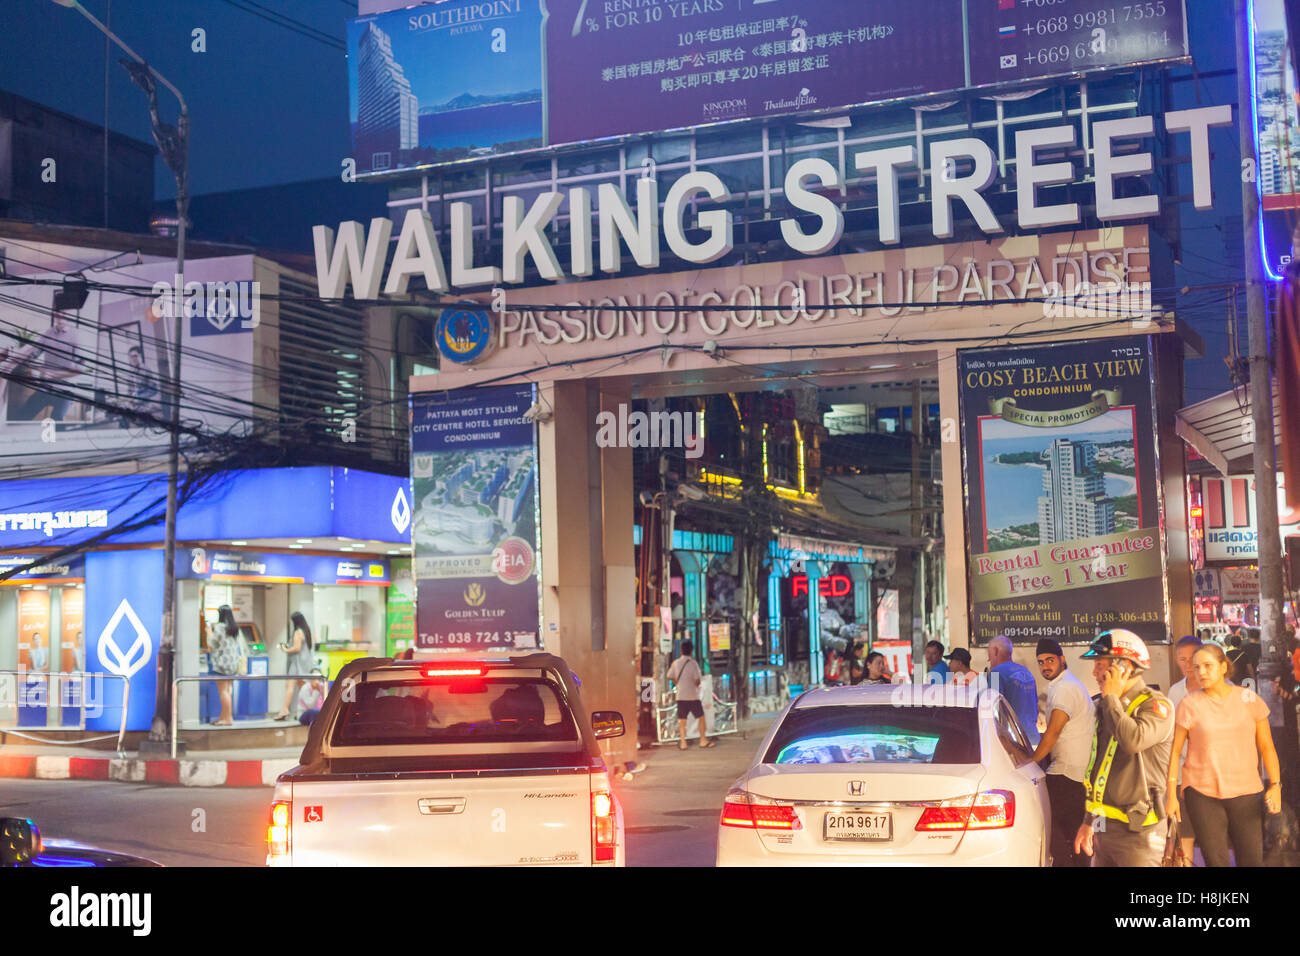 PATTAYA, THAILAND - 13 Oct 2016: The famous Walking Street nightlife / red  light district on October 13, 2016 in Pattaya, Thaila Stock Photo - Alamy